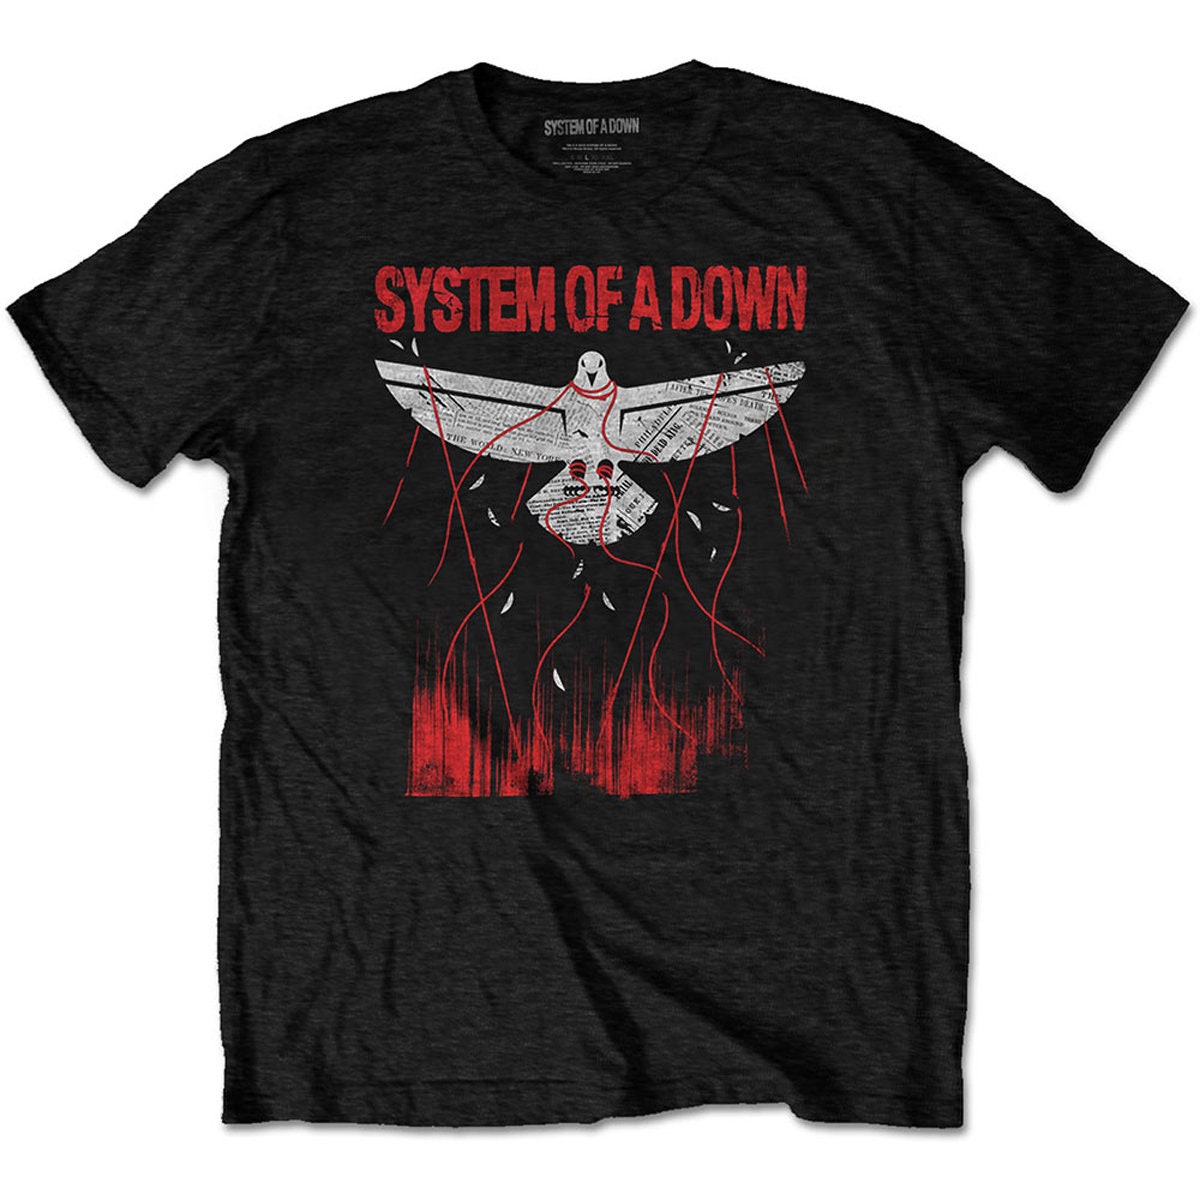 Discover SYSTEM OF DOWN Capture Serj Tankian Official Tee T-Shirt Mens Unisex